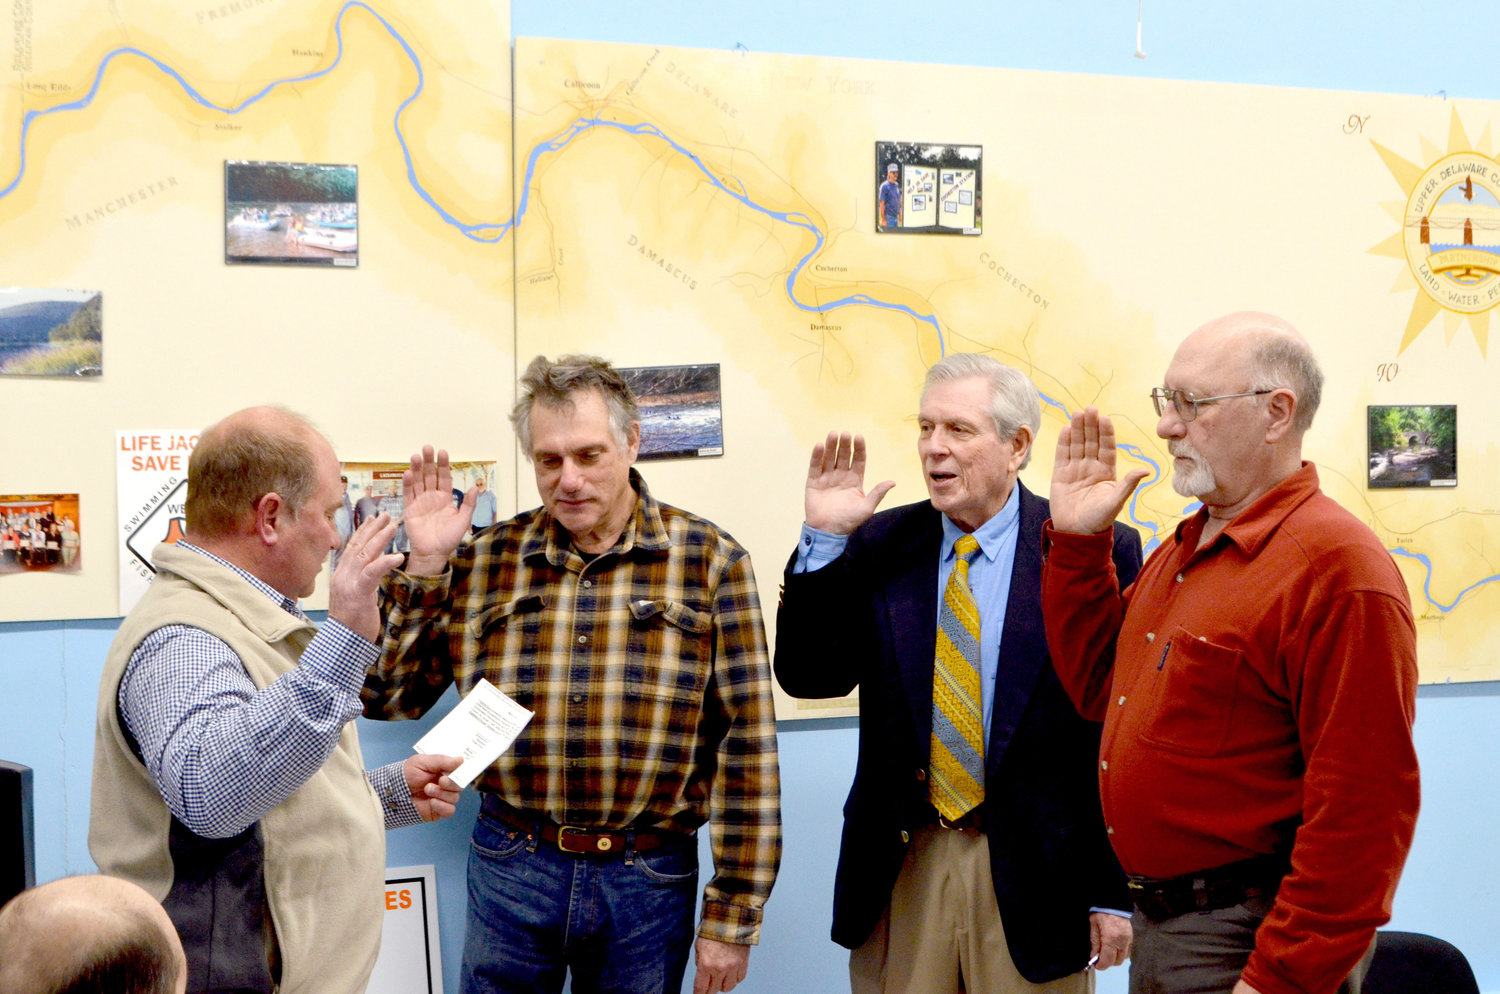 Town of Highland supervisor Jeff Haas, left, administers oaths of office to Upper Delaware Council vice-chairperson Aaron Robinson, Chairperson Andrew Boyar and Secretary/Treasurer Alan Henry.